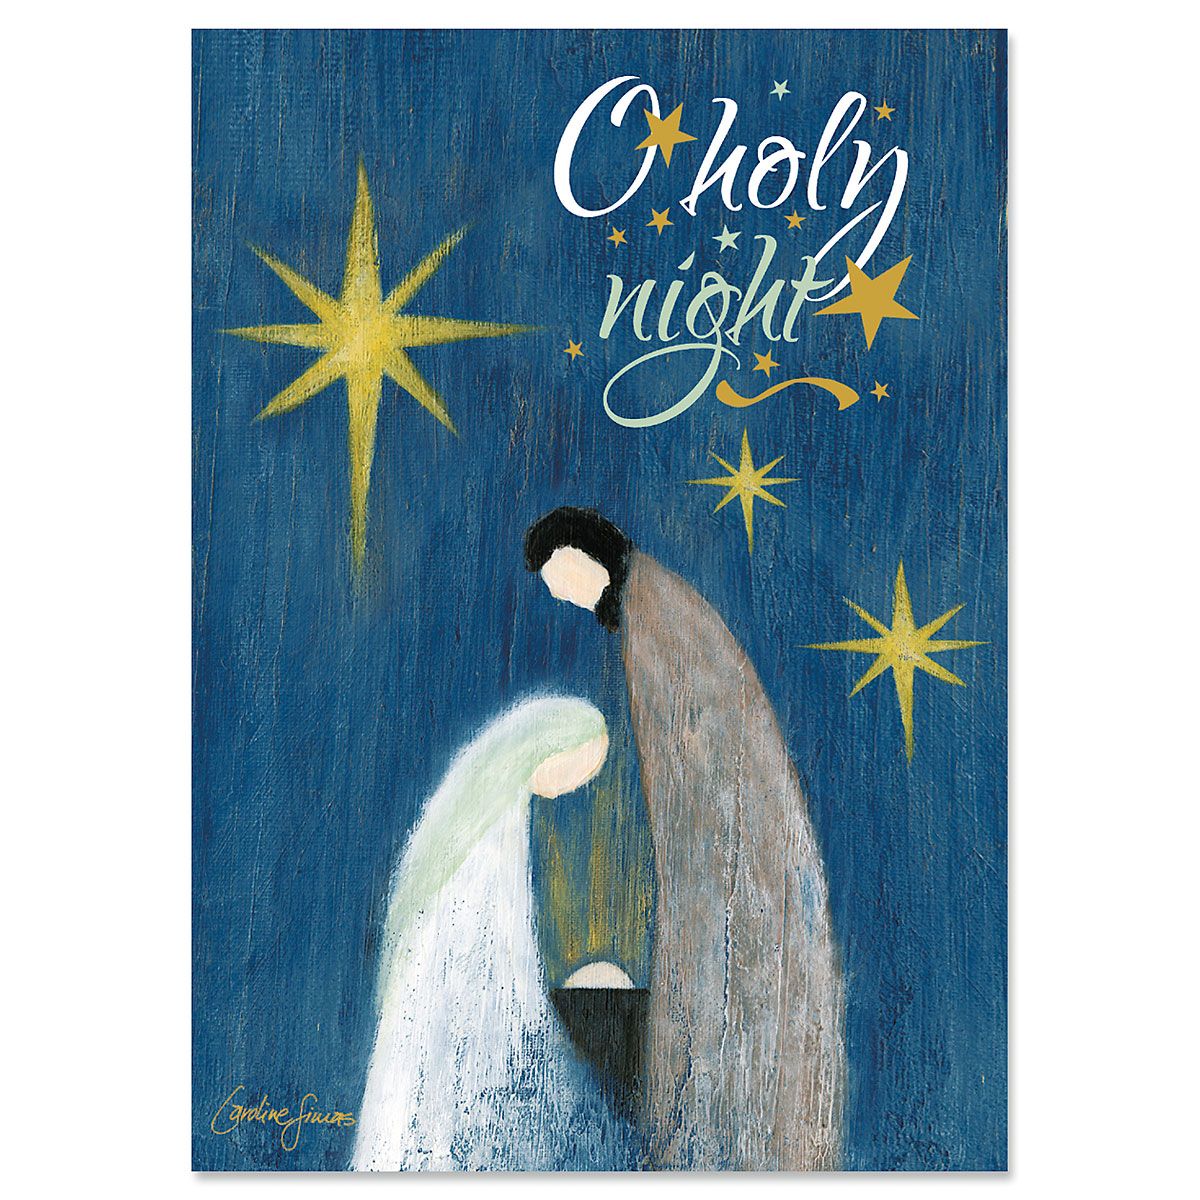 christian-christmas-card-message-isaiah-9-6-religious-christian-by